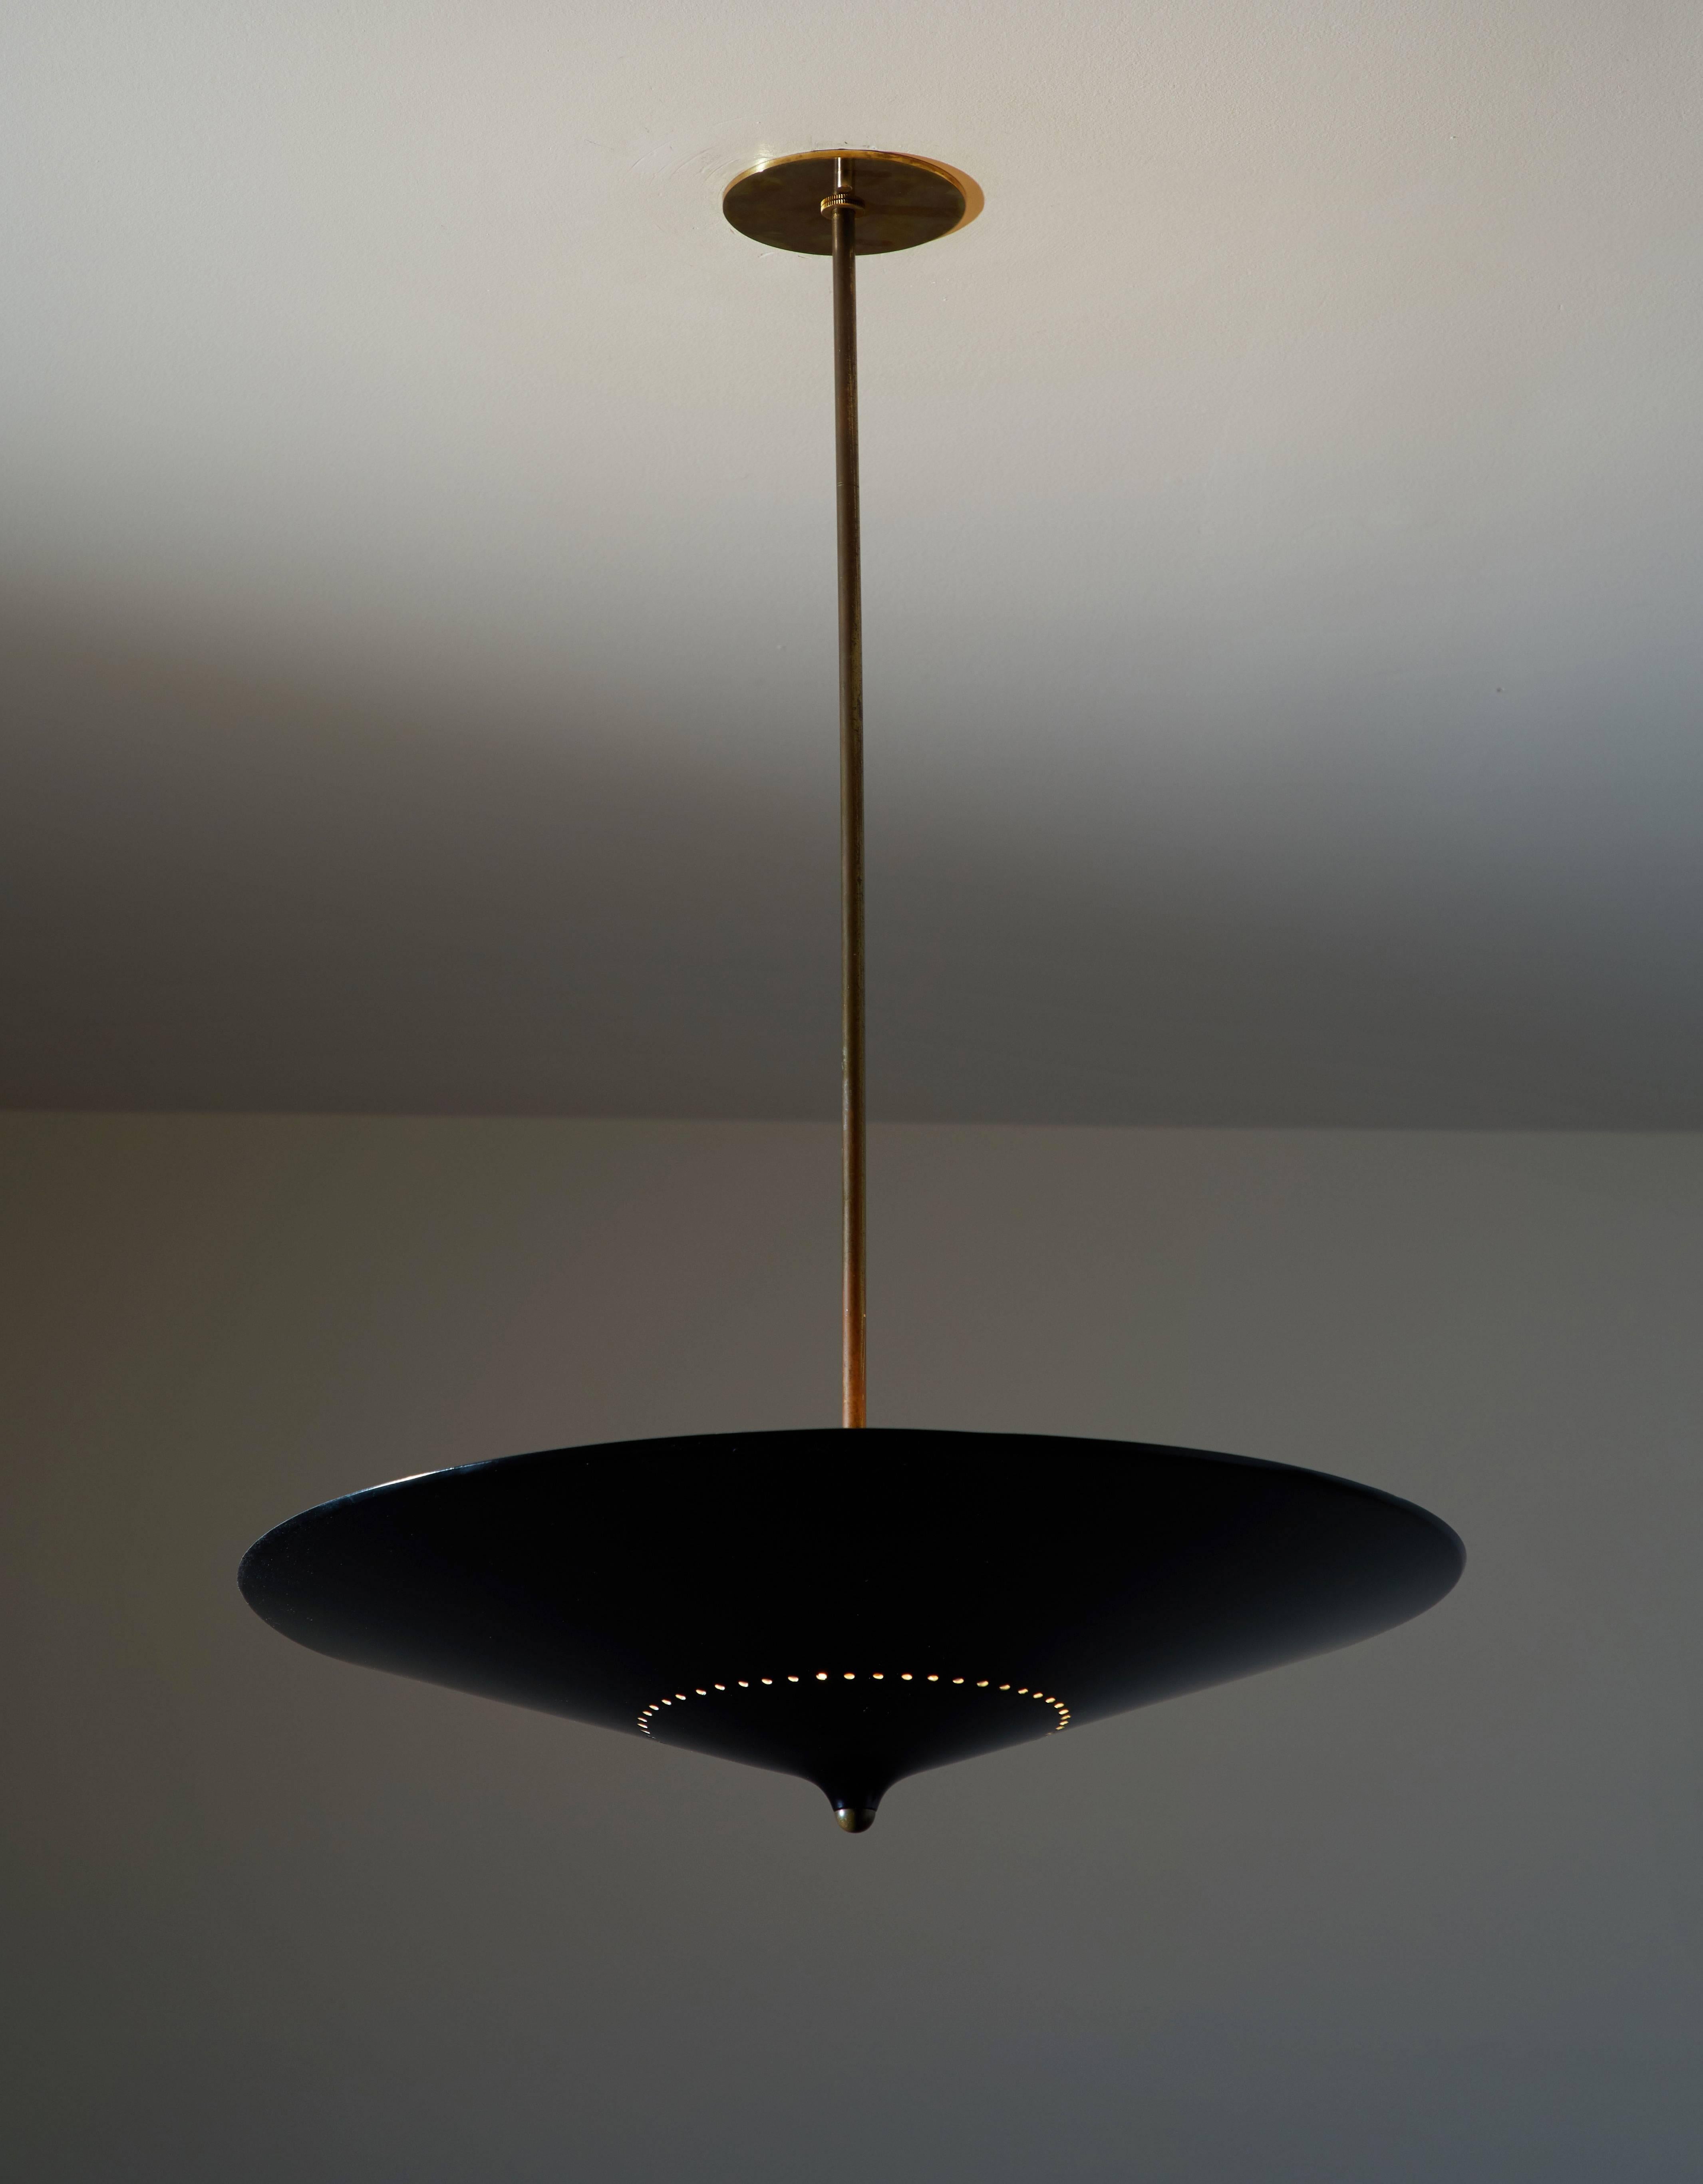 Flush mount pendant by Franco Buzzi for O-Luce designed in Italy, circa 1950s. Painted metal with perforations at bottom of fixture. Wired for US junction boxes. Takes four e27 40w maximum bulbs.